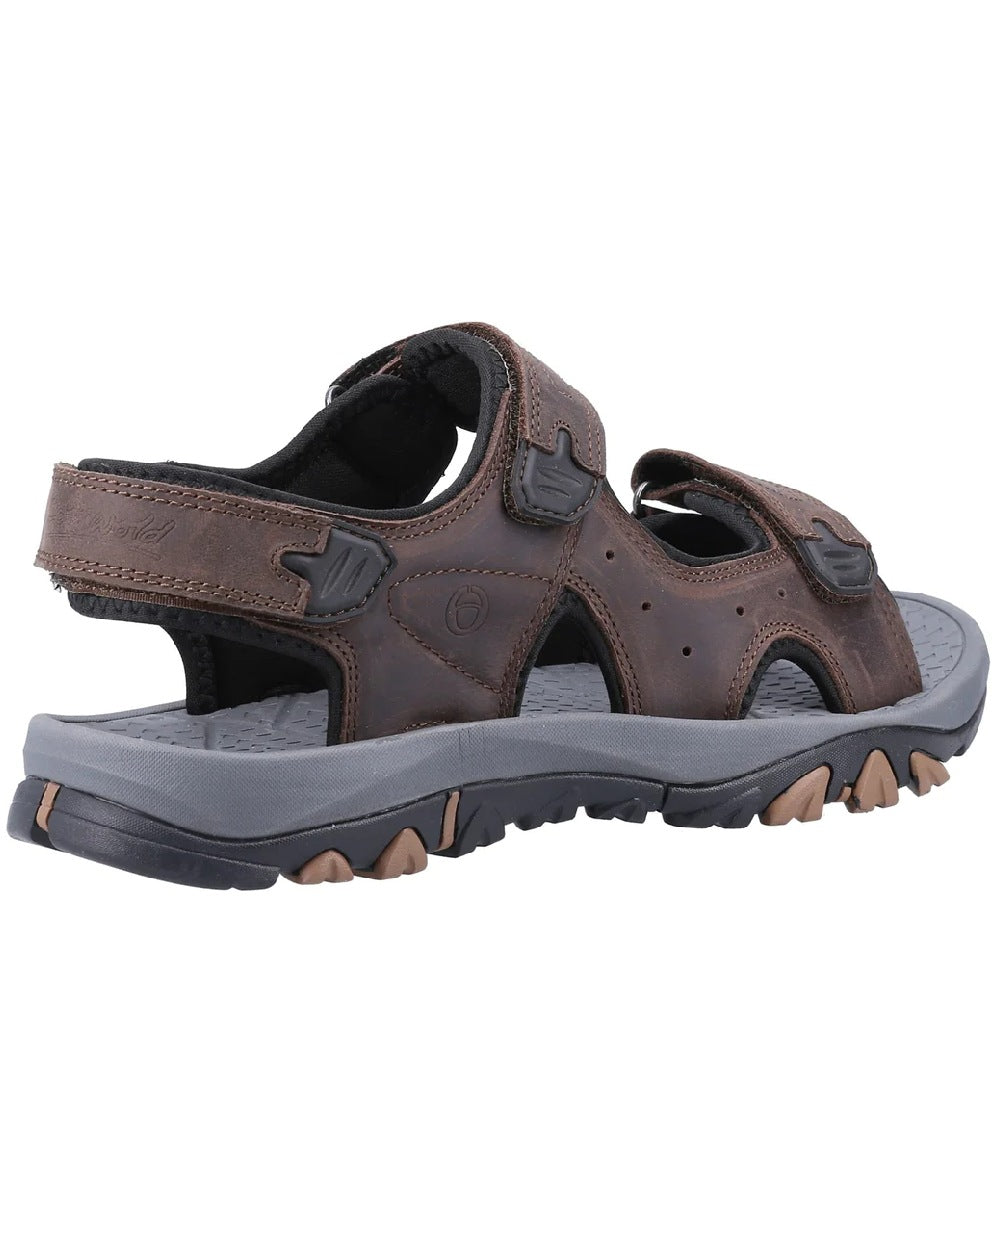 Cotswold Lansdown Sandals in Brown 